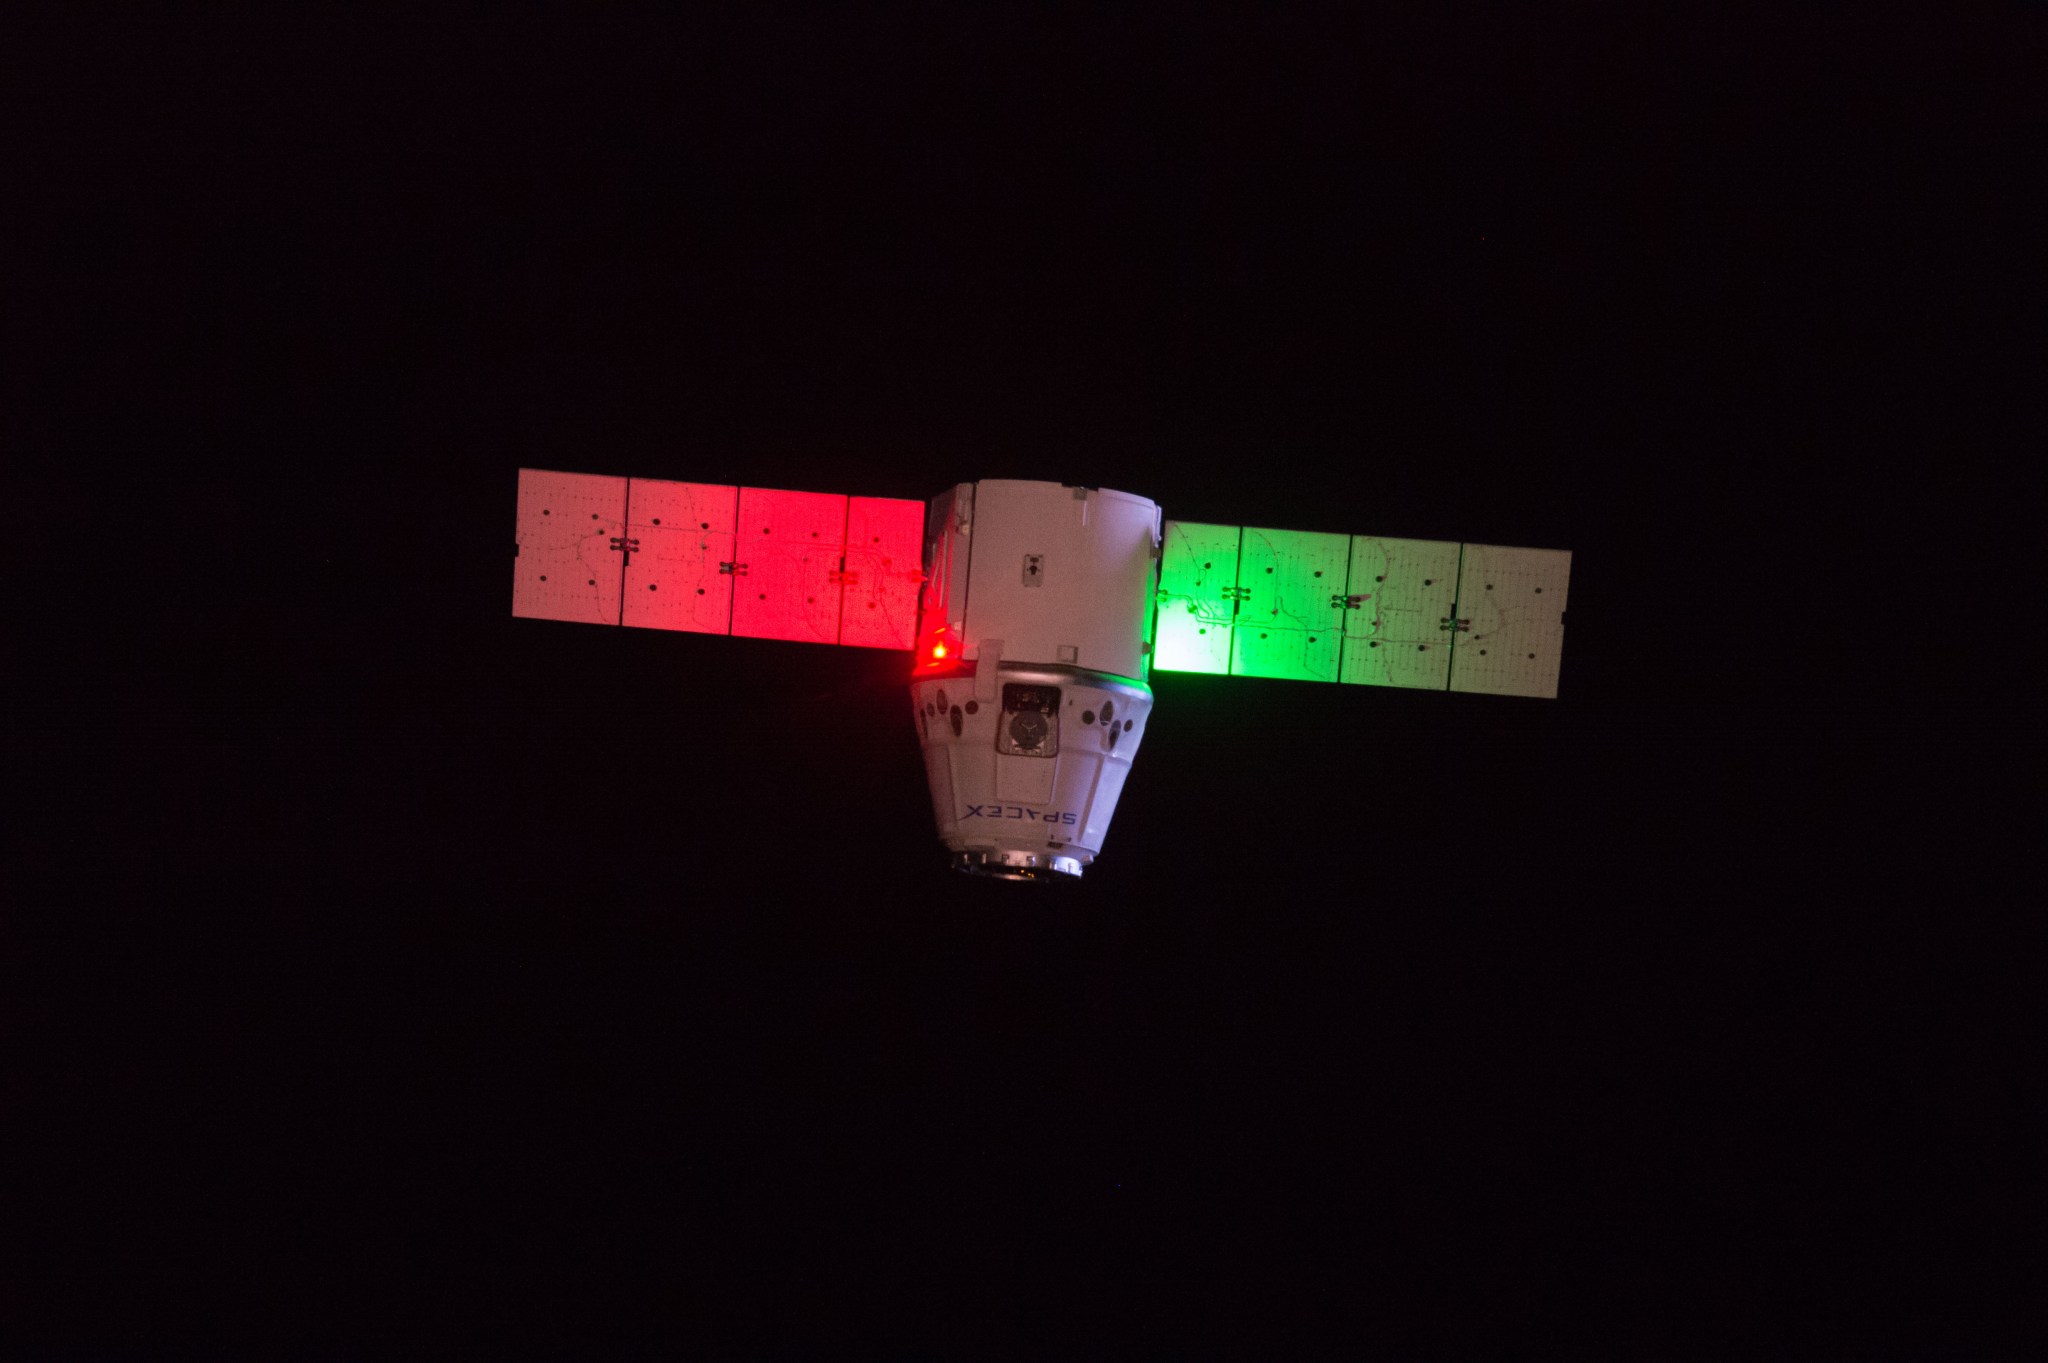 SpaceX Dragon cargo spacecraft is set to leave the International Space Station on Sunday, July 2